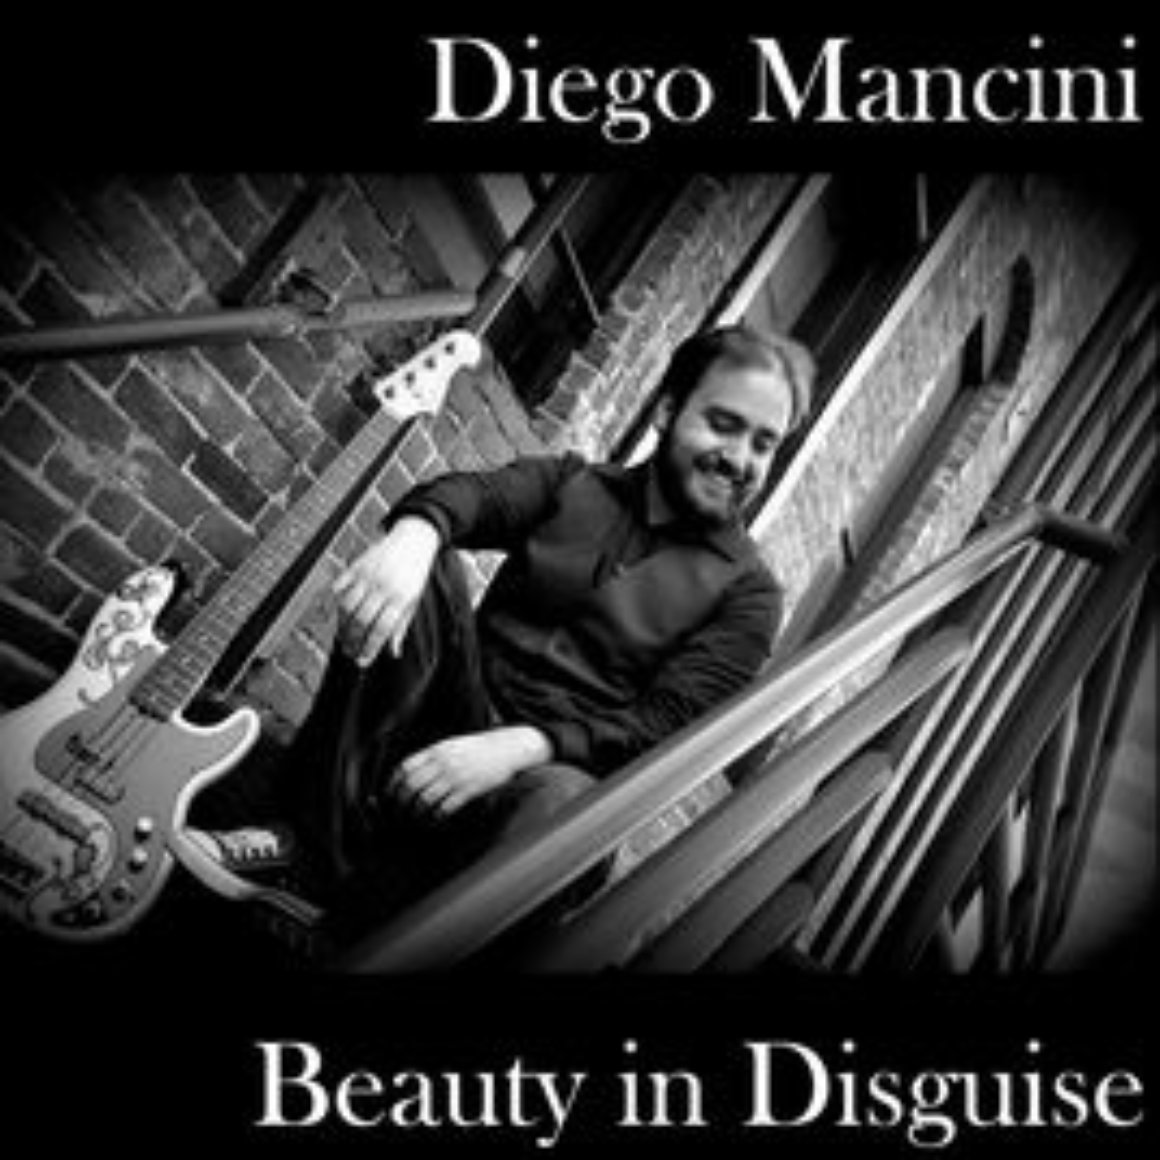 Diego Mancini - Beauty in Disguise (2013)